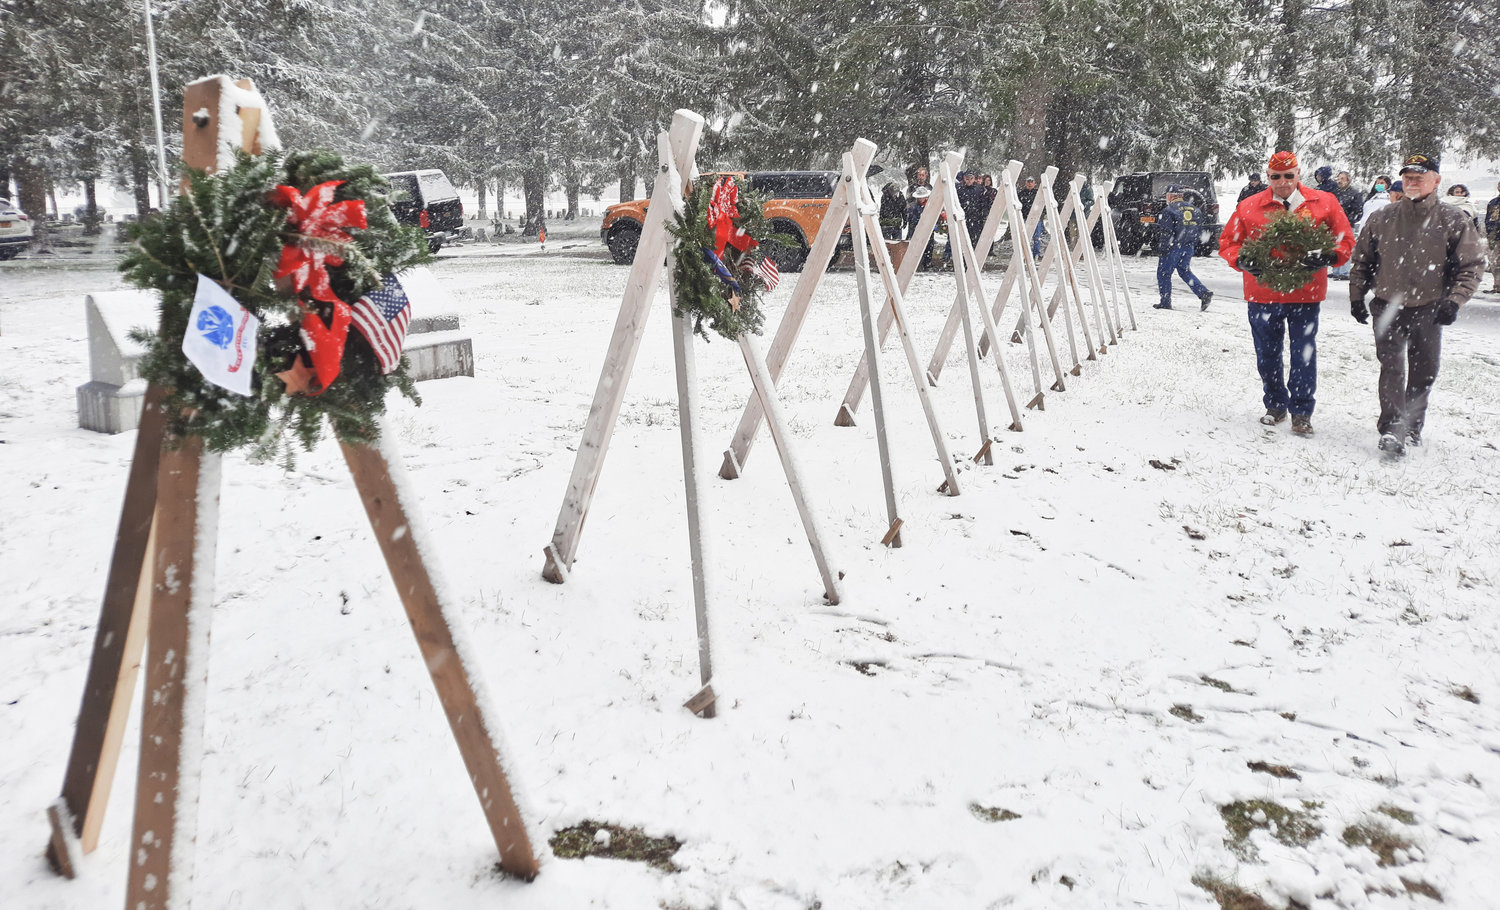 REMEMBERED ON A COLD WINTER — Wreaths are carried and dedicated to all those who have served in the military for Wreaths Across America. The Lee American Legion performs the ceremony at Evergreen Cemetery in Lee.